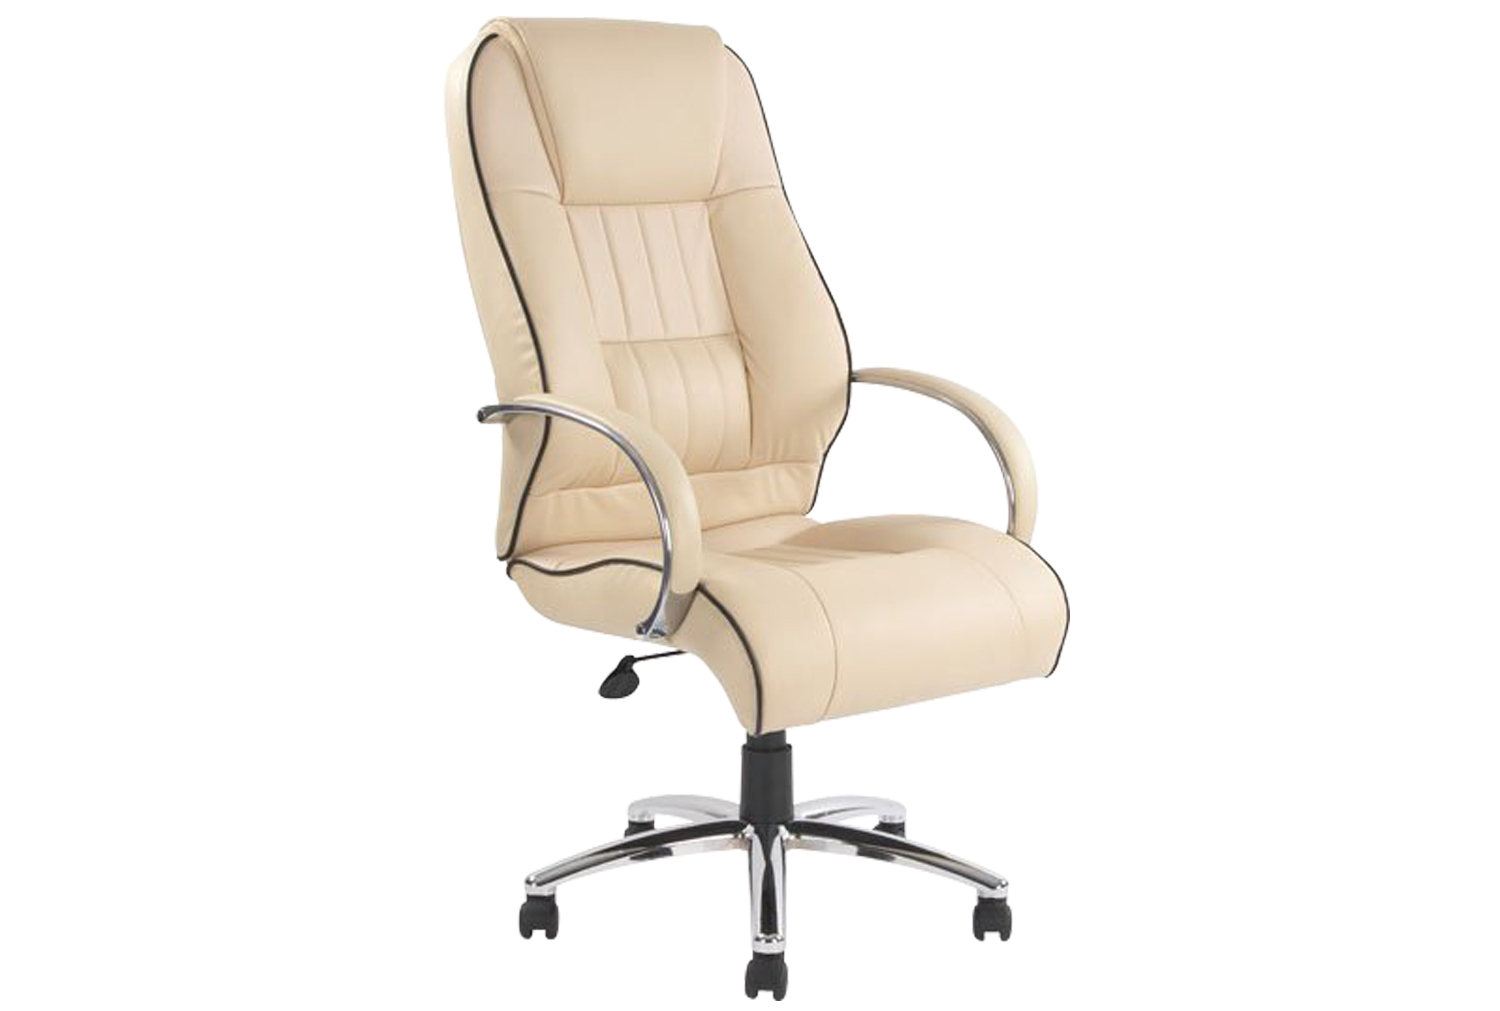 Freya High Back Executive Cream Leather Faced Office Chair, Cream, Fully Installed